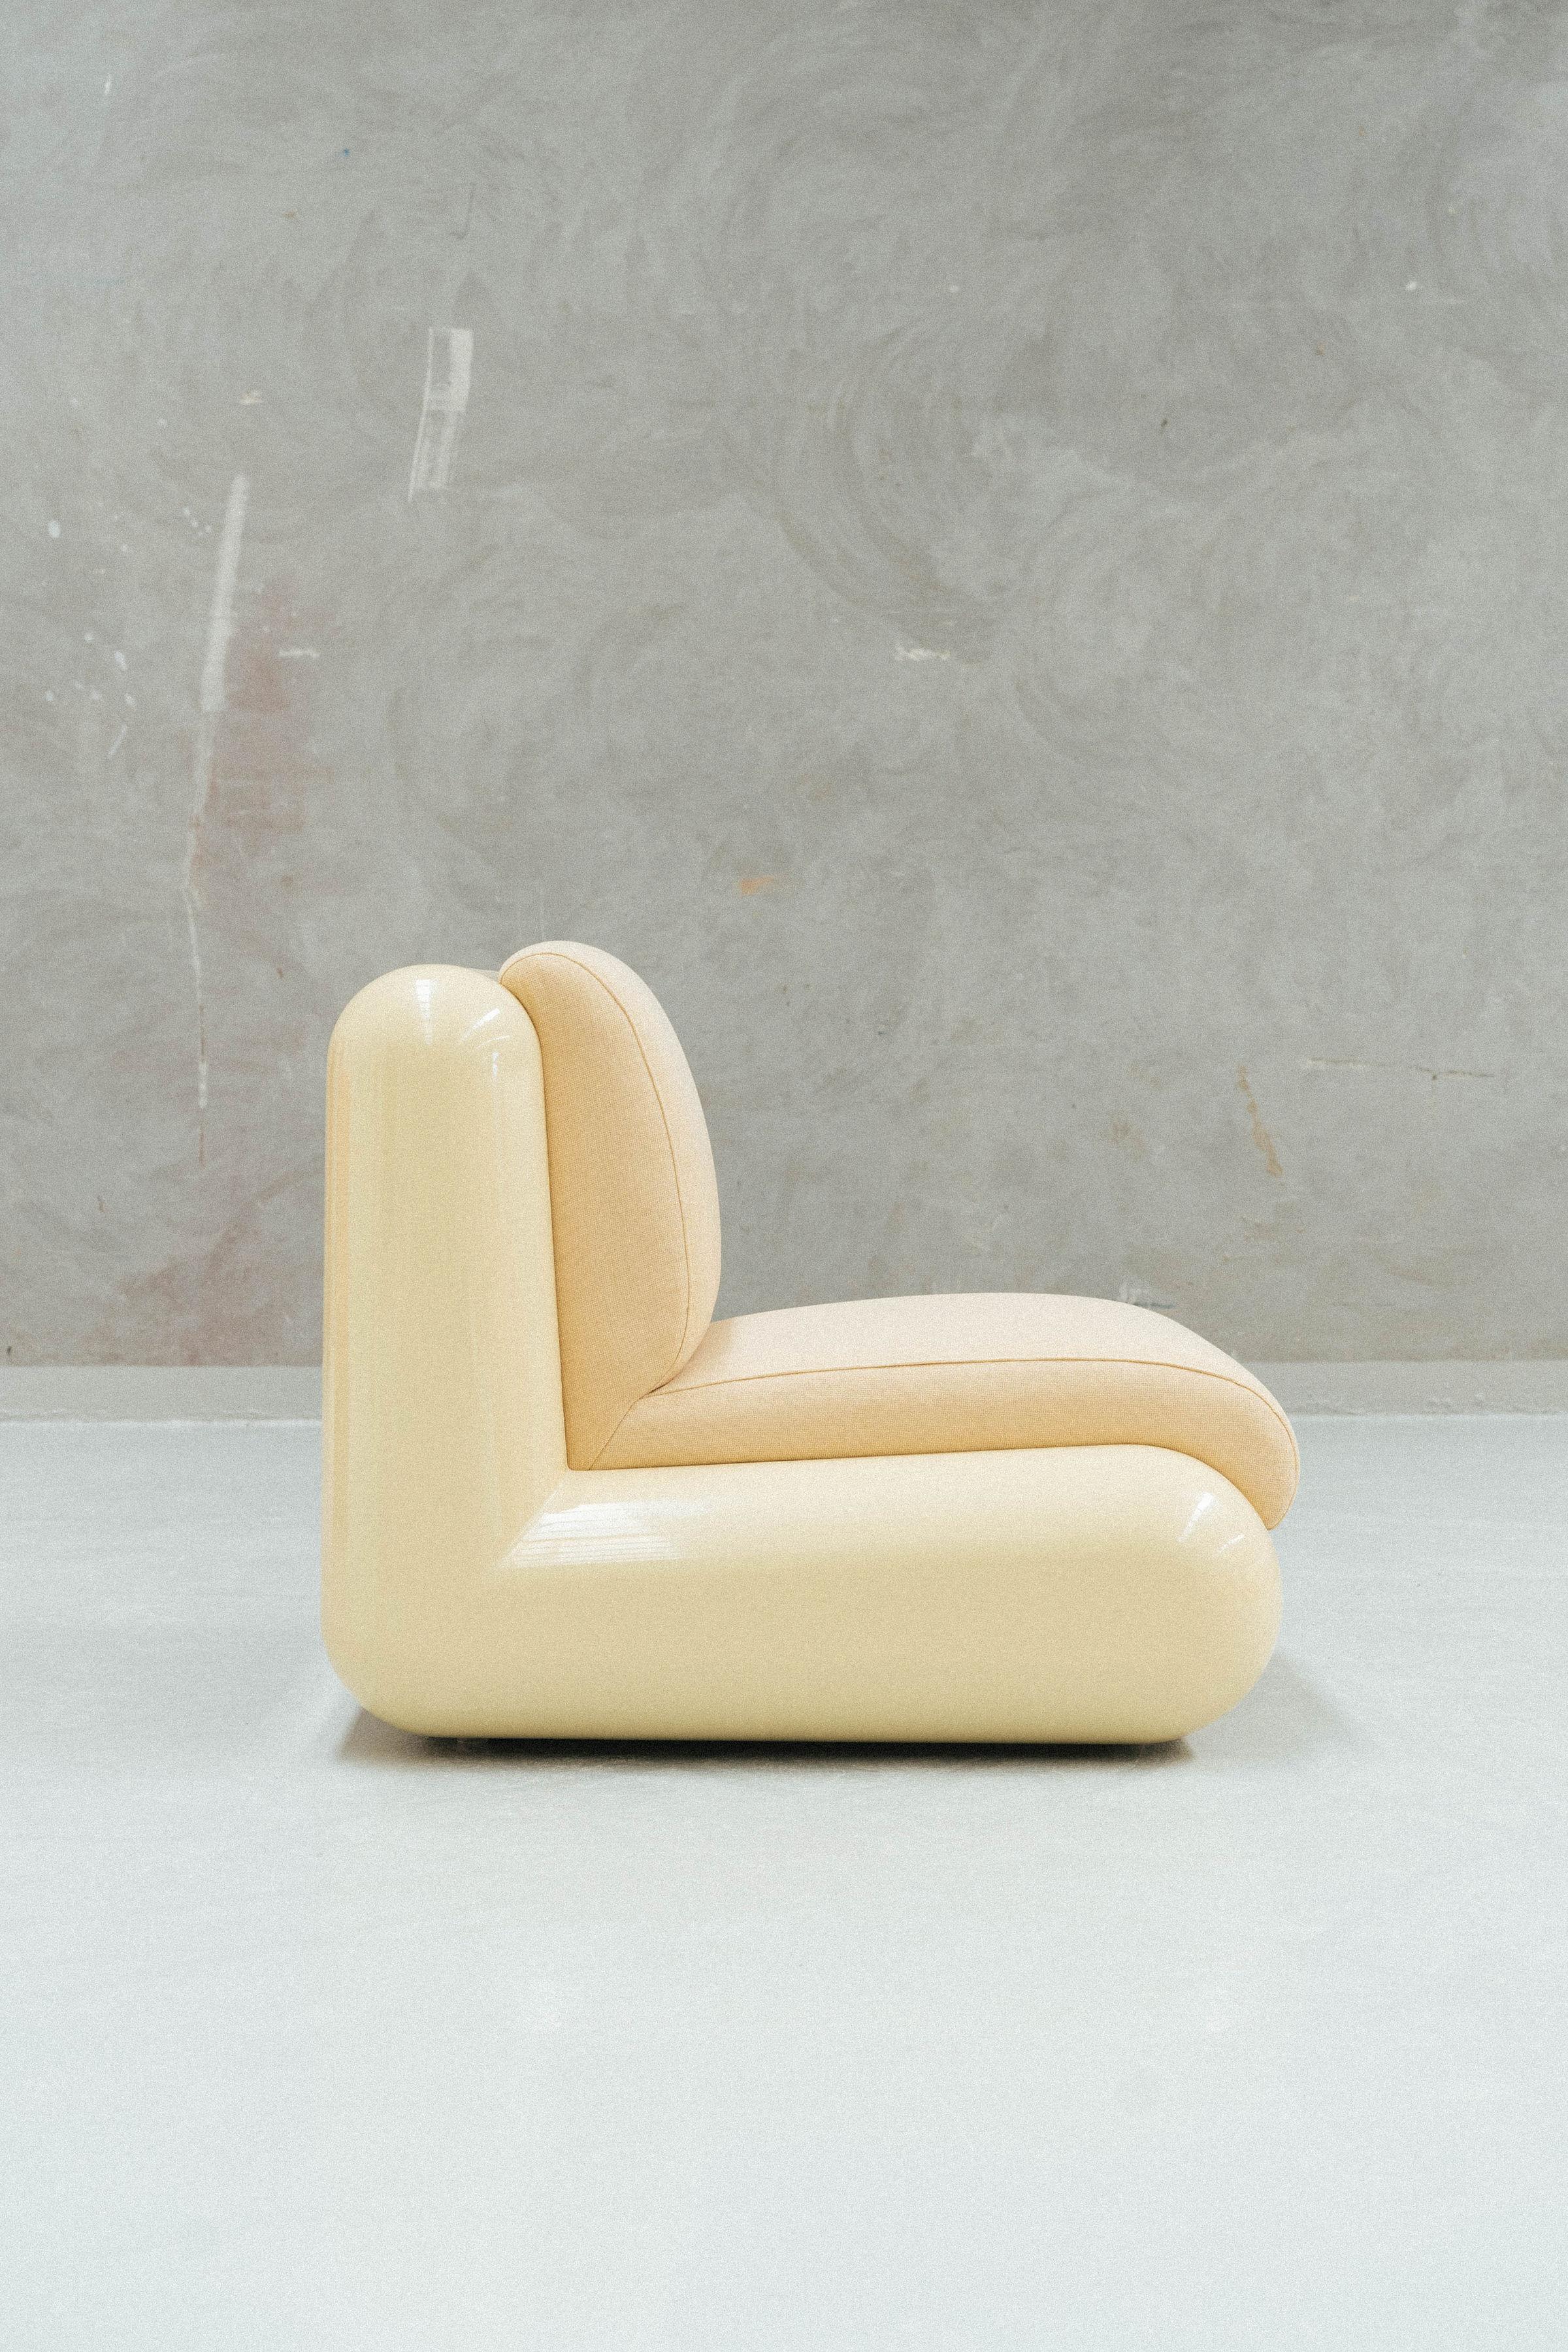 Hand-Crafted T4 Single Seat in Cream Soda For Sale